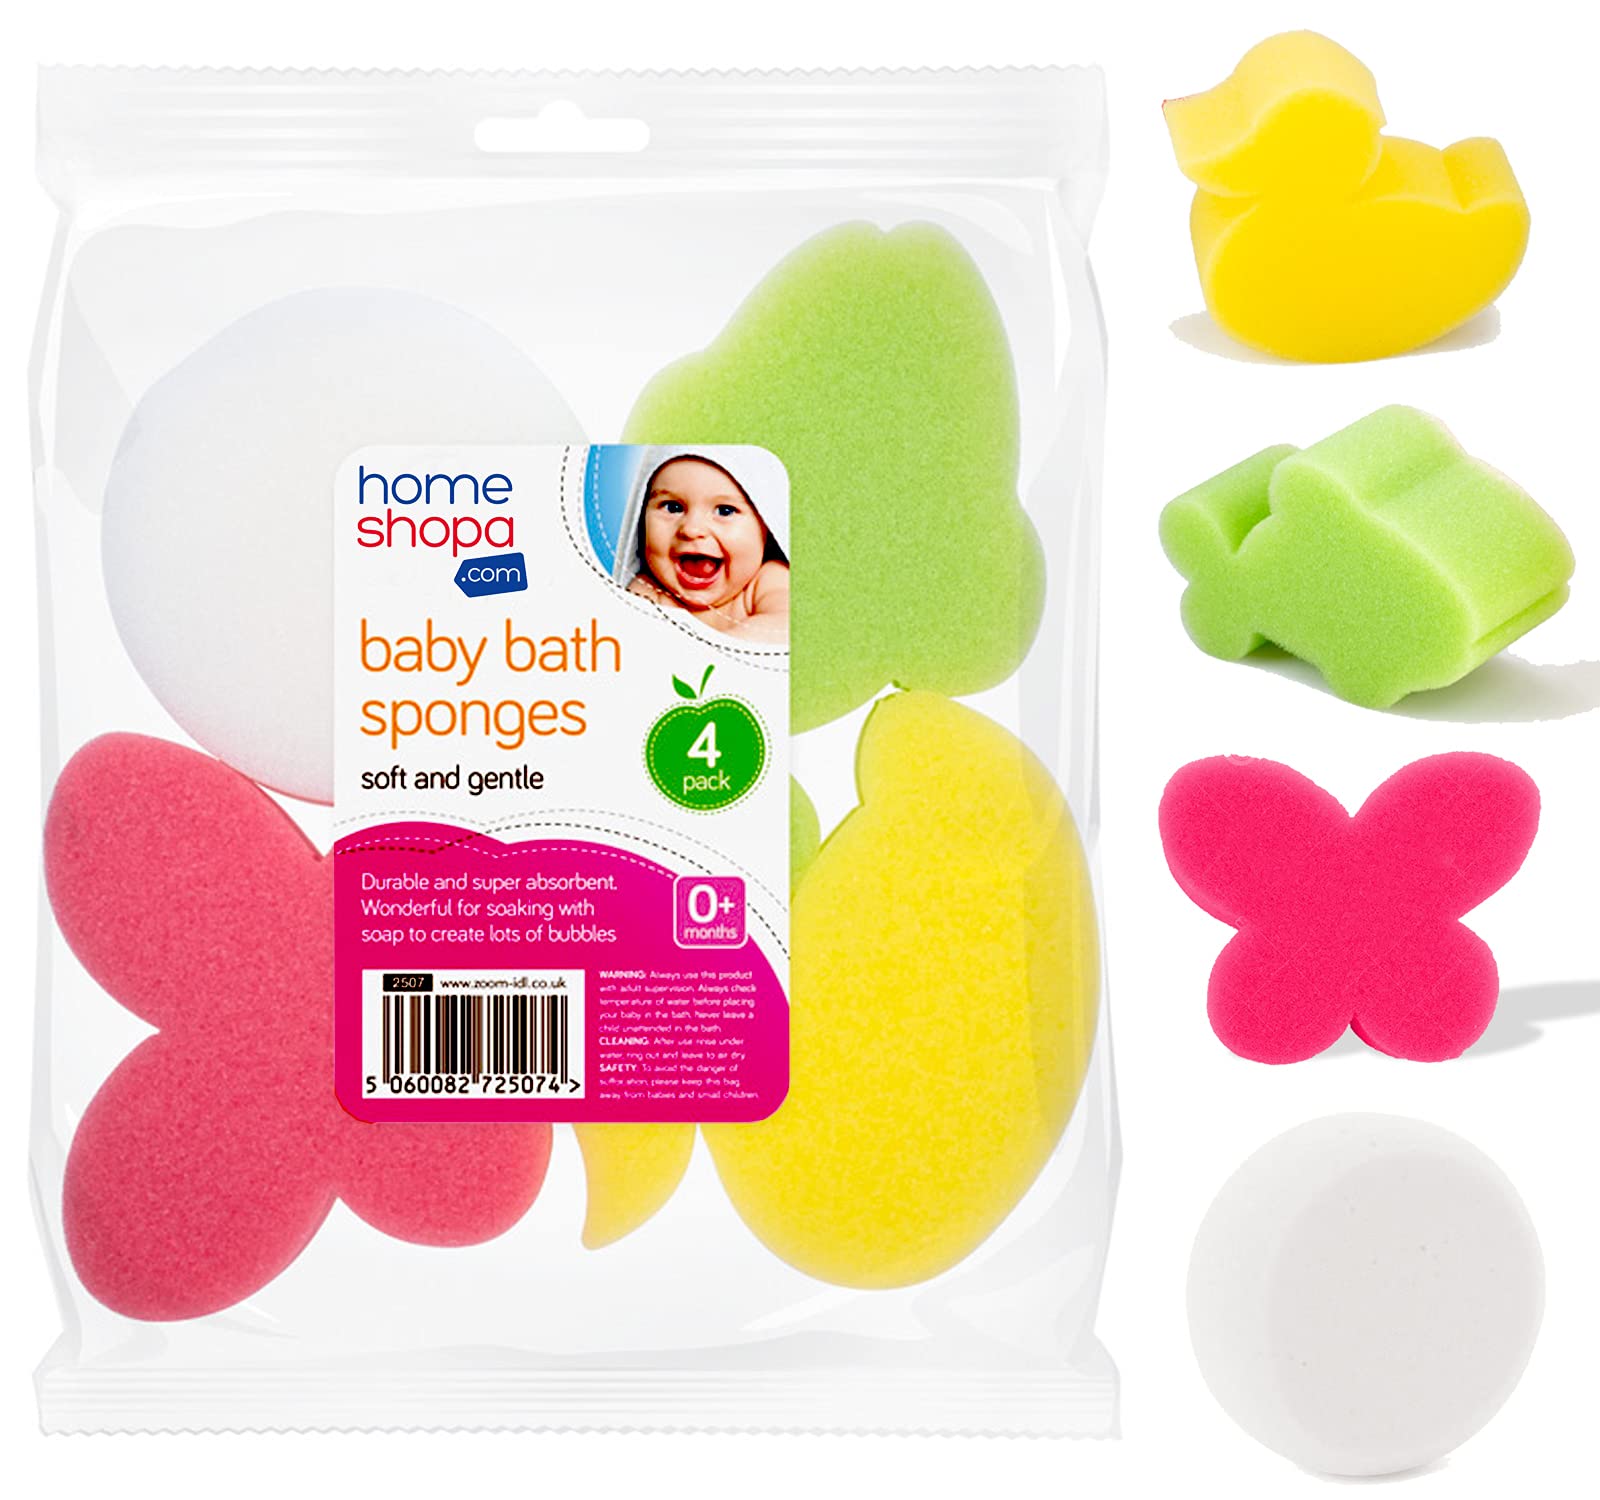 HOMESHOPA Baby Bath Sponge Pack of 4, Soft & Gentle Baby Shower Sponge, Comfortable Bath Care Baby Sponges for Kids & Toddlers